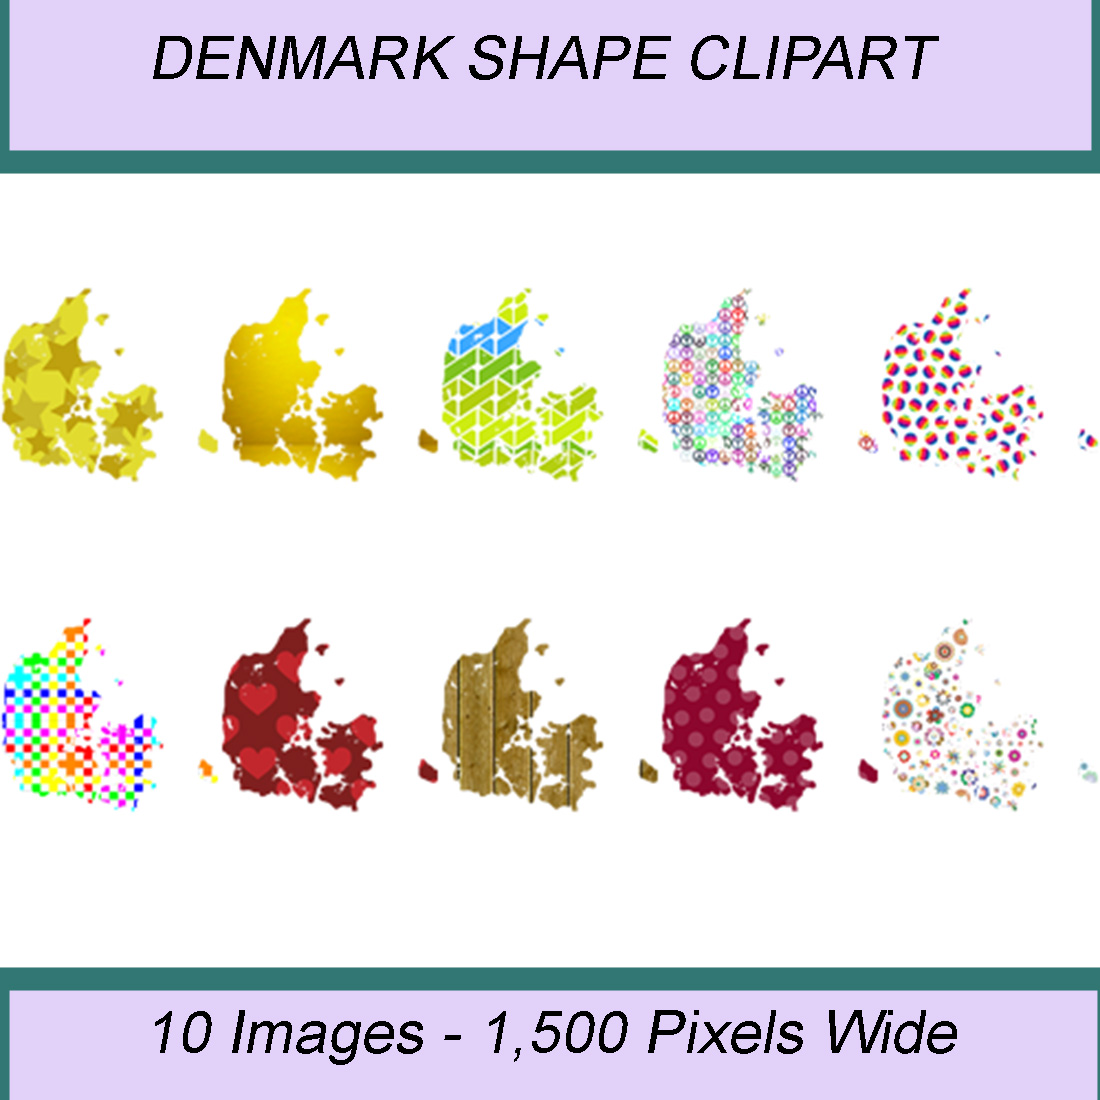 DENMARK SHAPE CLIPART ICONS cover image.